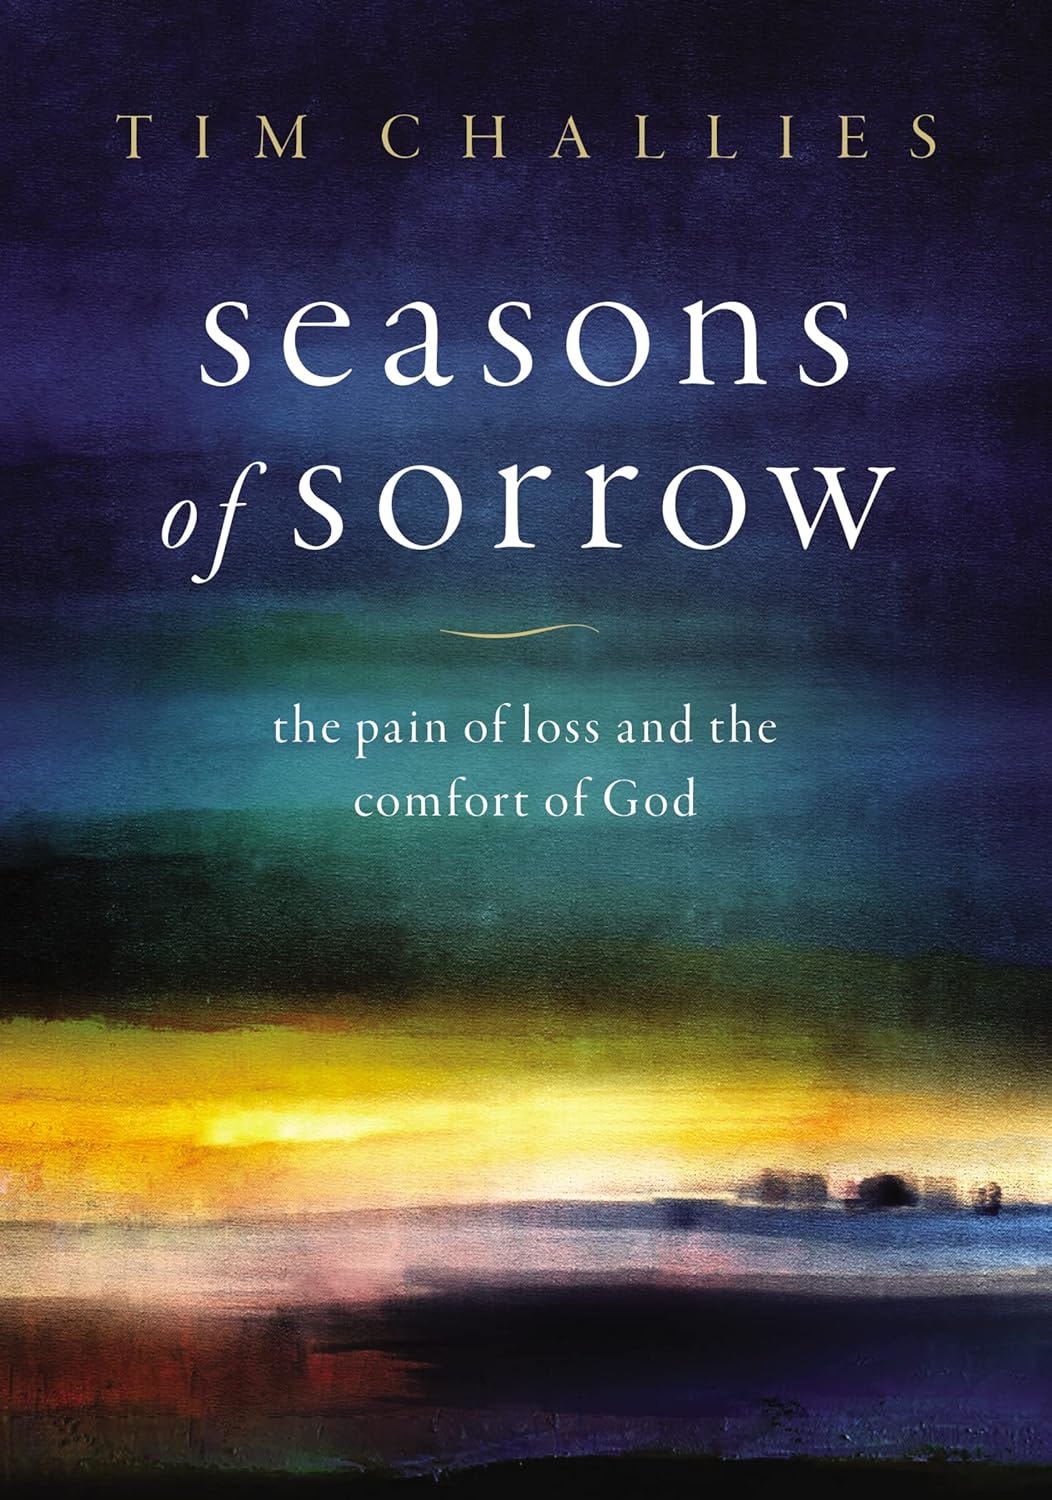 Image of the cover to the book Seasons of Sorrow by Tim Challies.